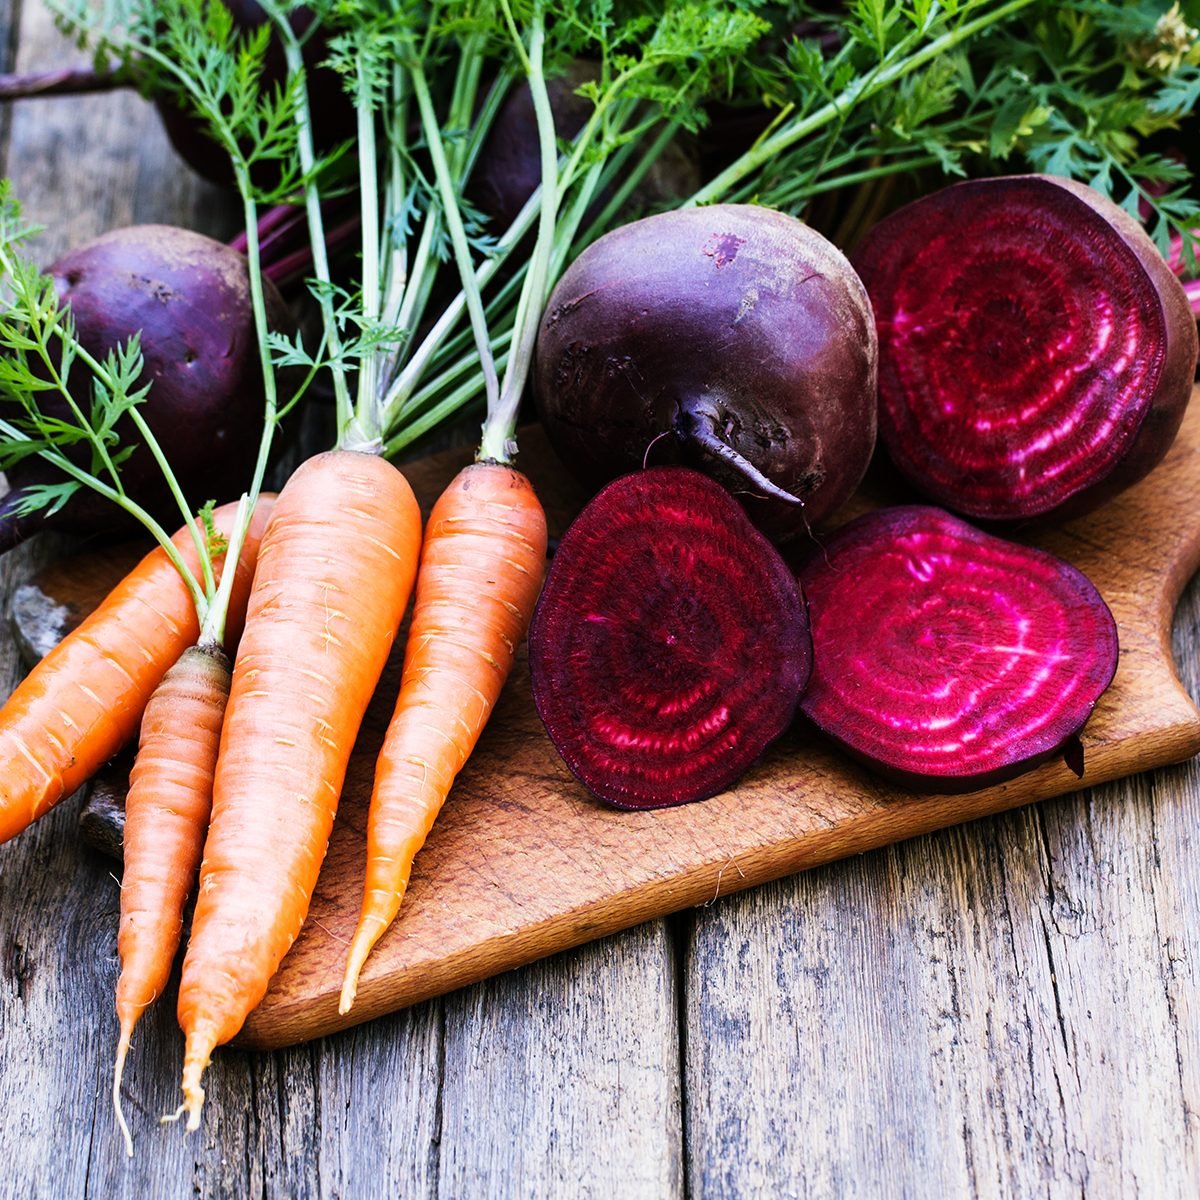 Fresh beet and carrots on wooden background